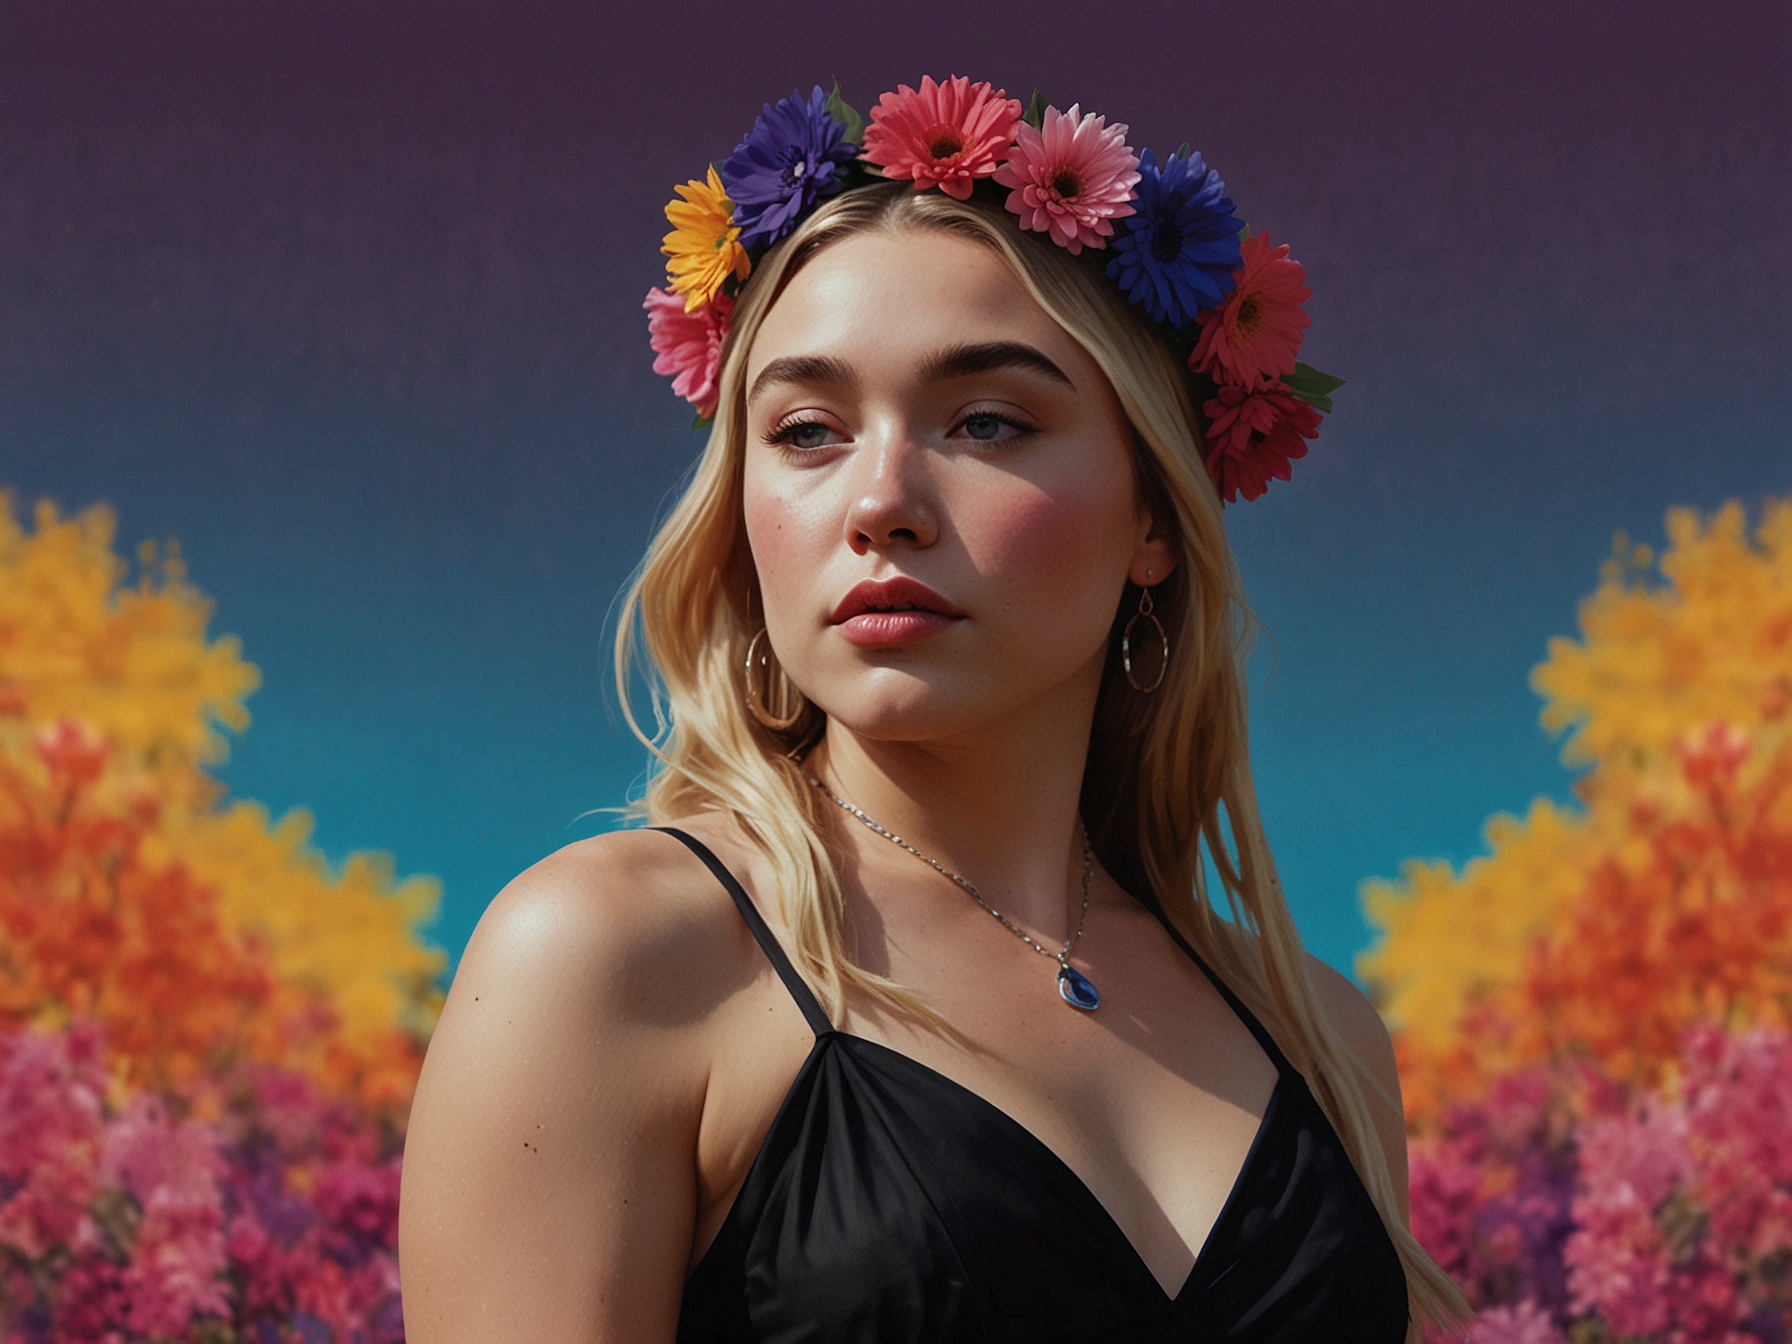 Florence Pugh at the Glastonbury Festival wearing a vibrant flower crown with shades of pink, purple, and blue. Her black halter-neck dress elegantly contrasts with the colorful accessory.